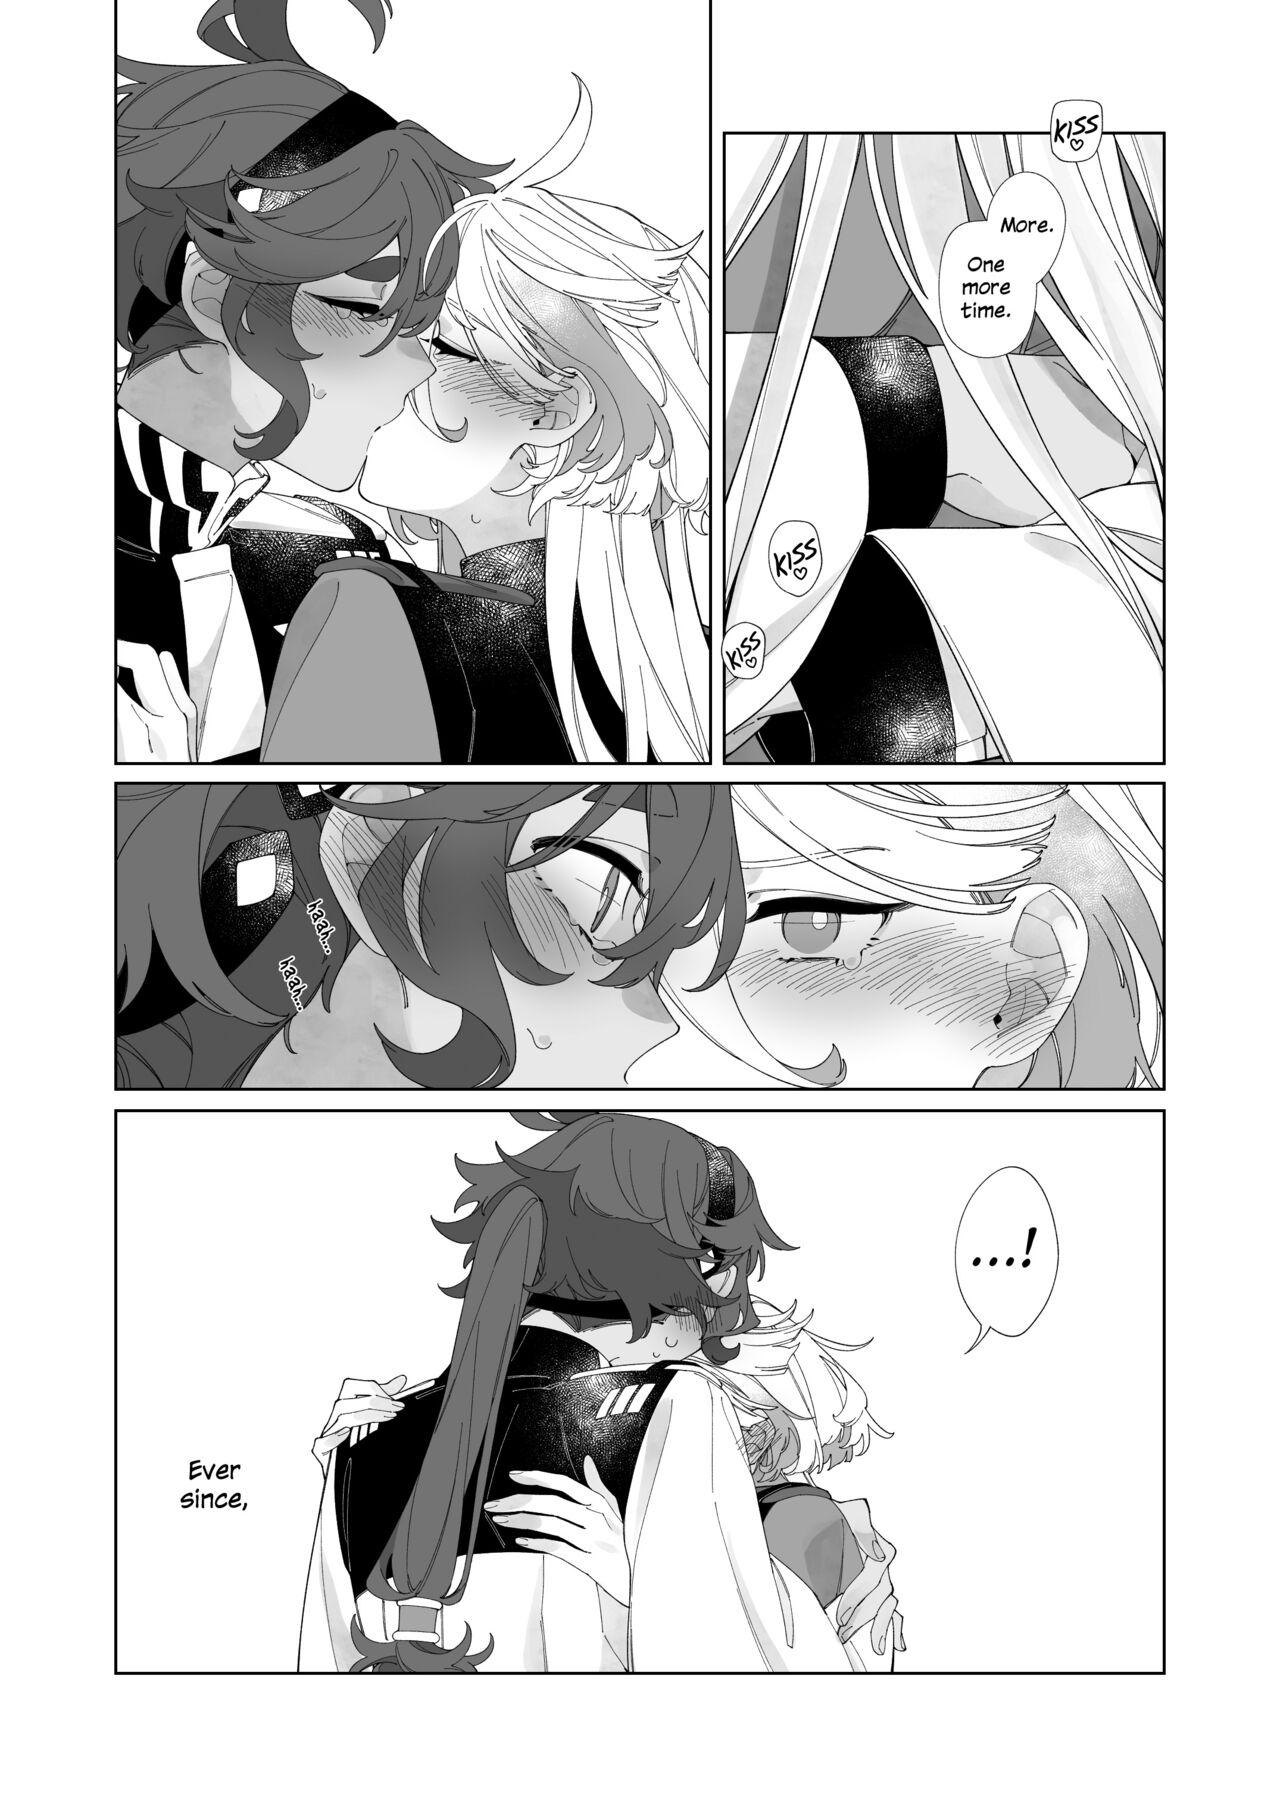 Couch Kiss no Ato Nani ga Shitai? | After Kissing, What Else Do You Want to Do? - Mobile suit gundam the witch from mercury Step - Page 7